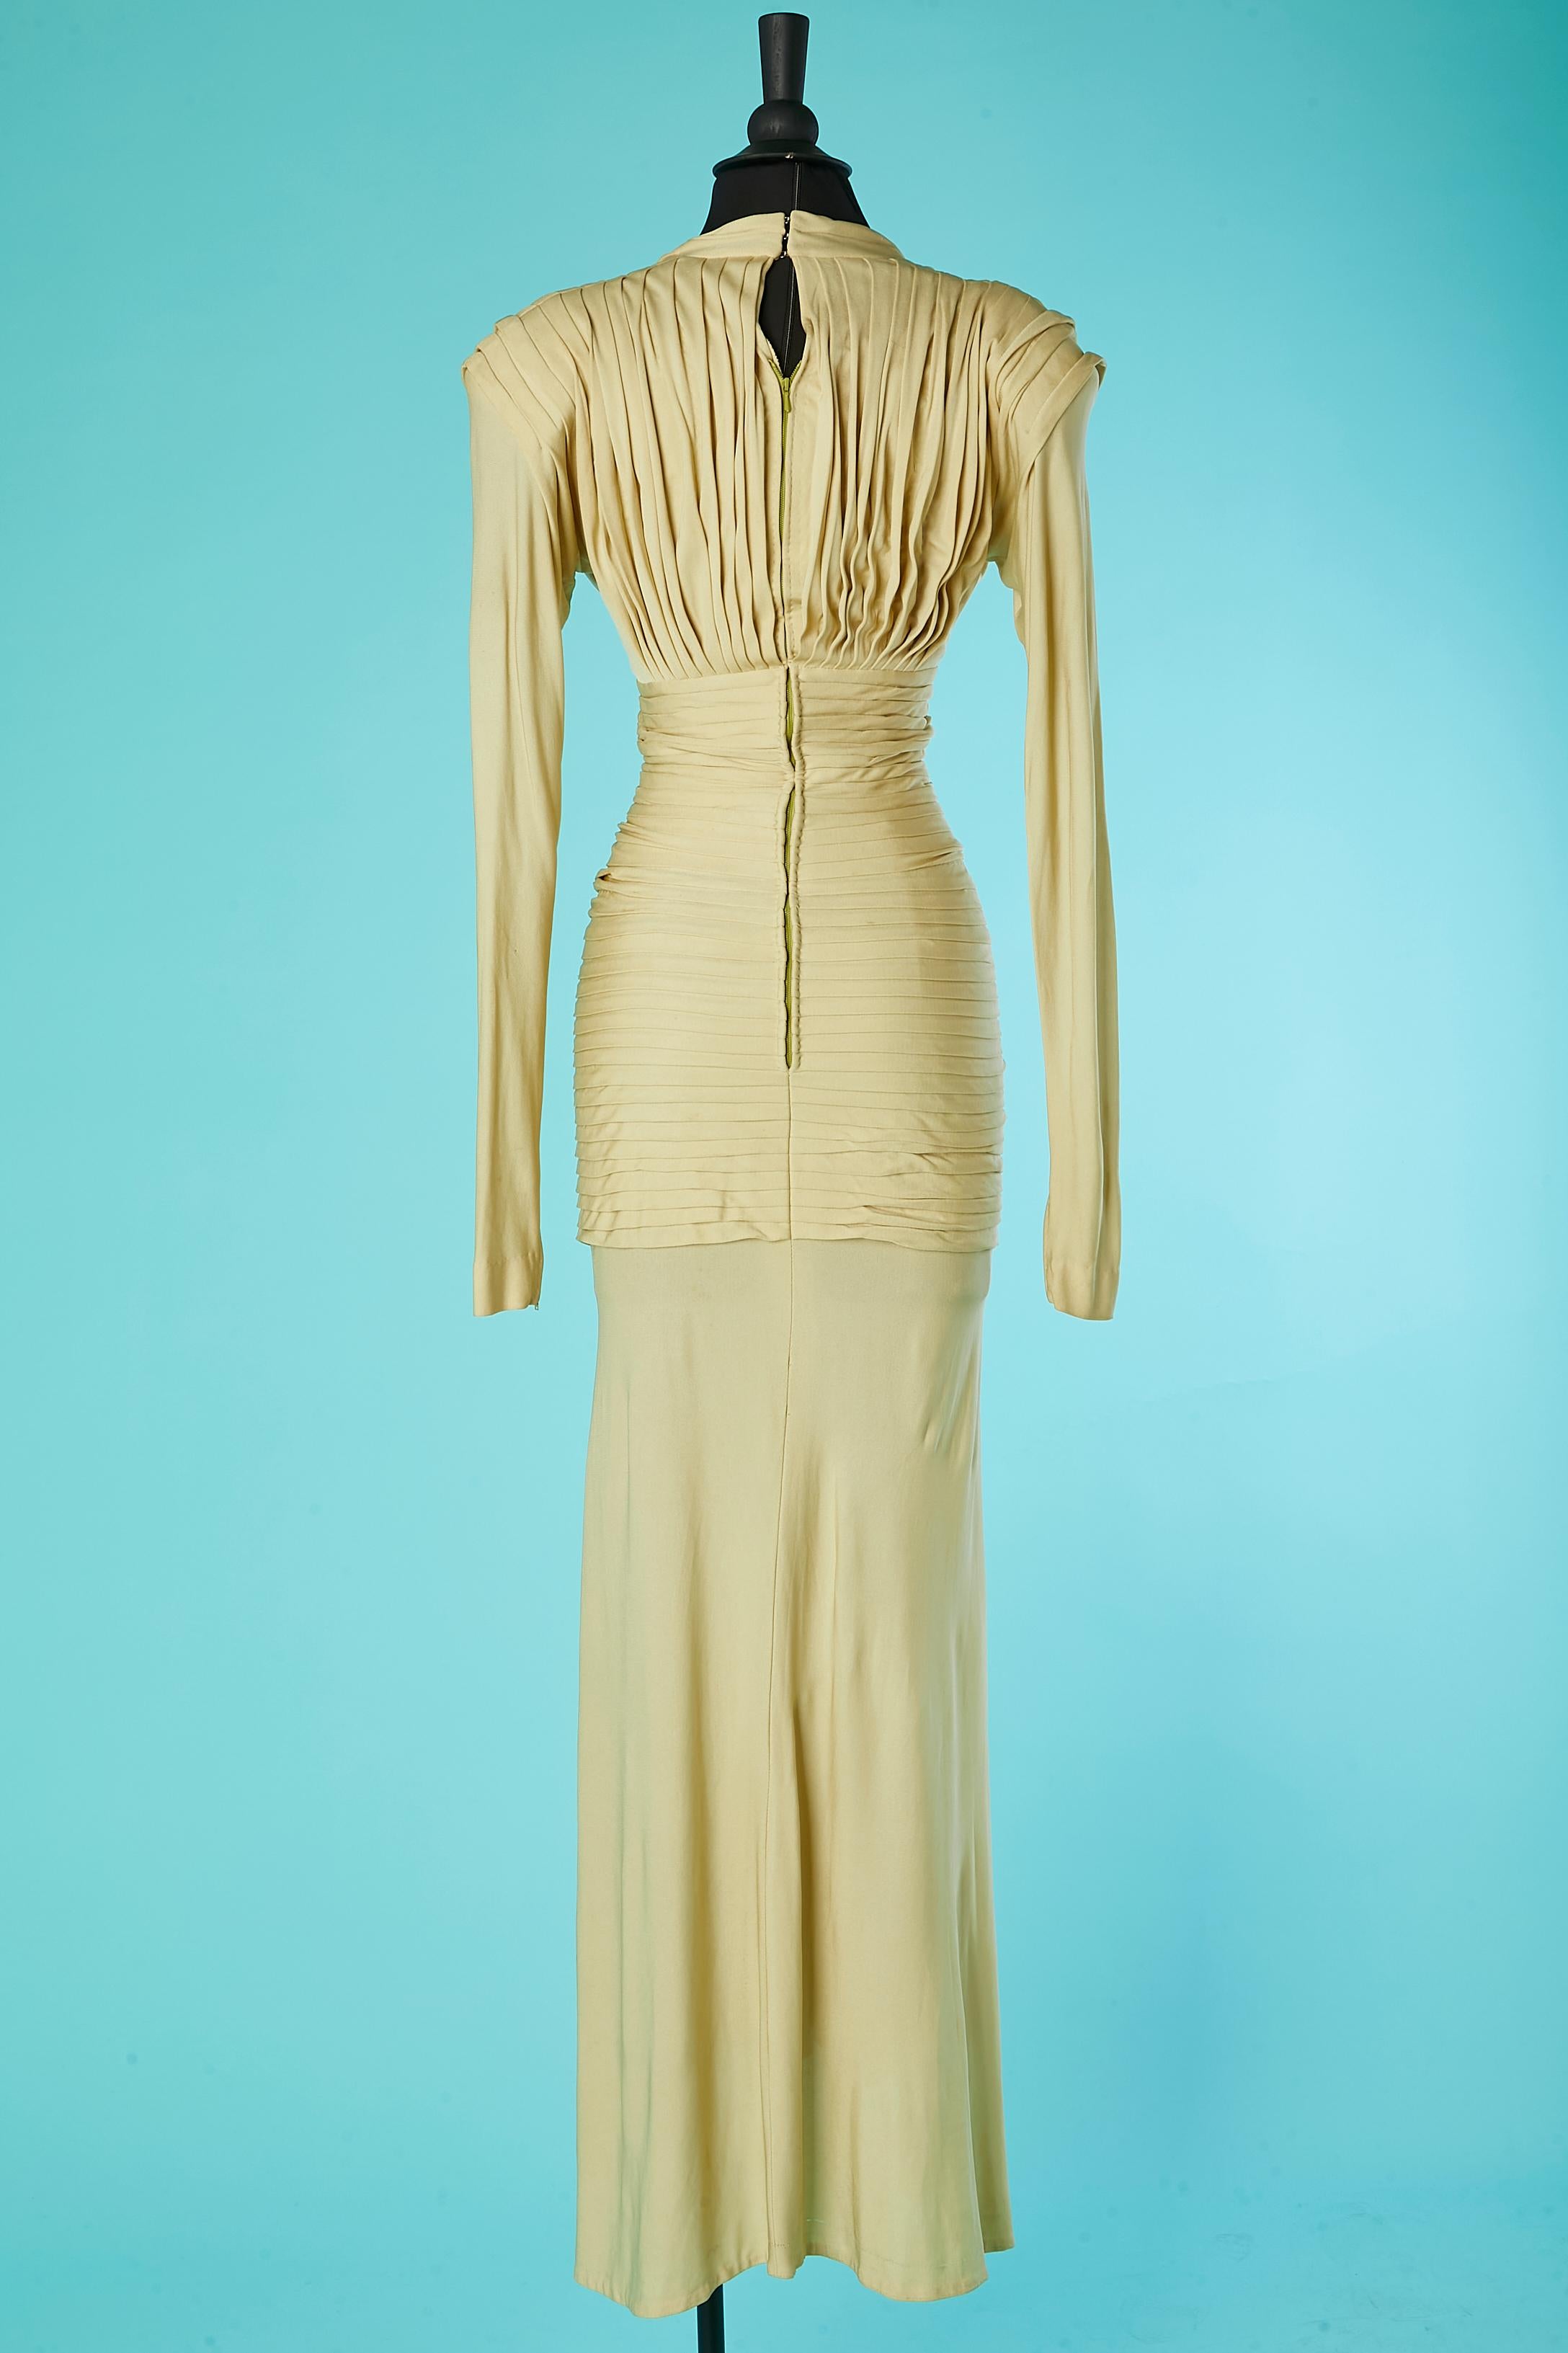 Iconic silk jersey draped and pleated handmade evening dress Lanvin Paris 1944 For Sale 3